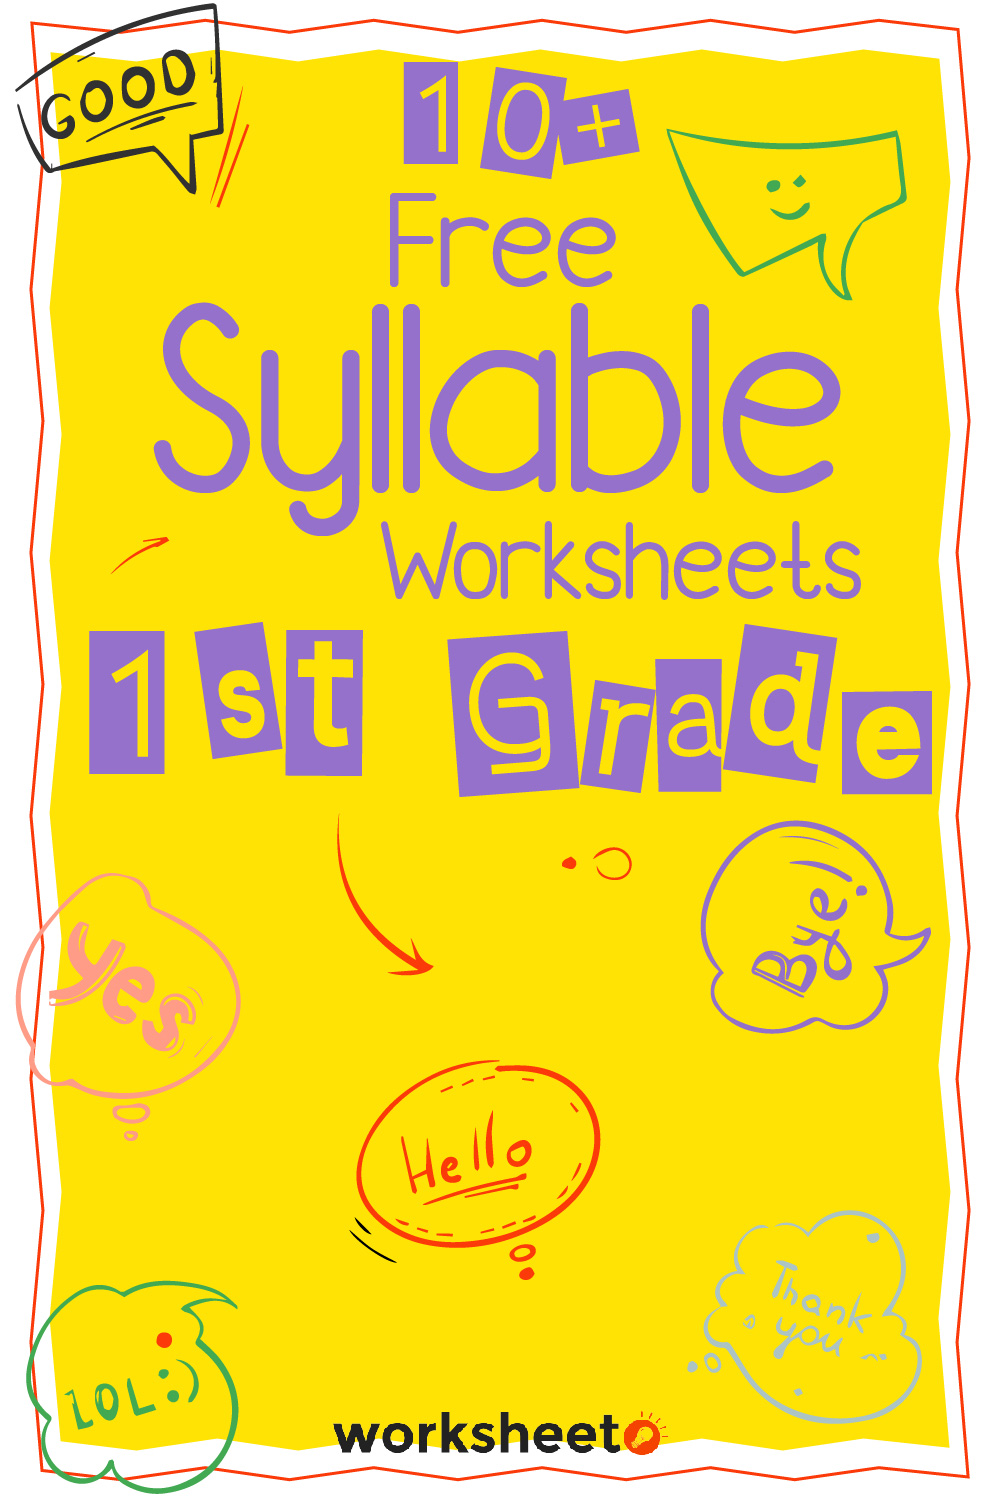 18 Images of  Syllable Worksheets 1st Grade